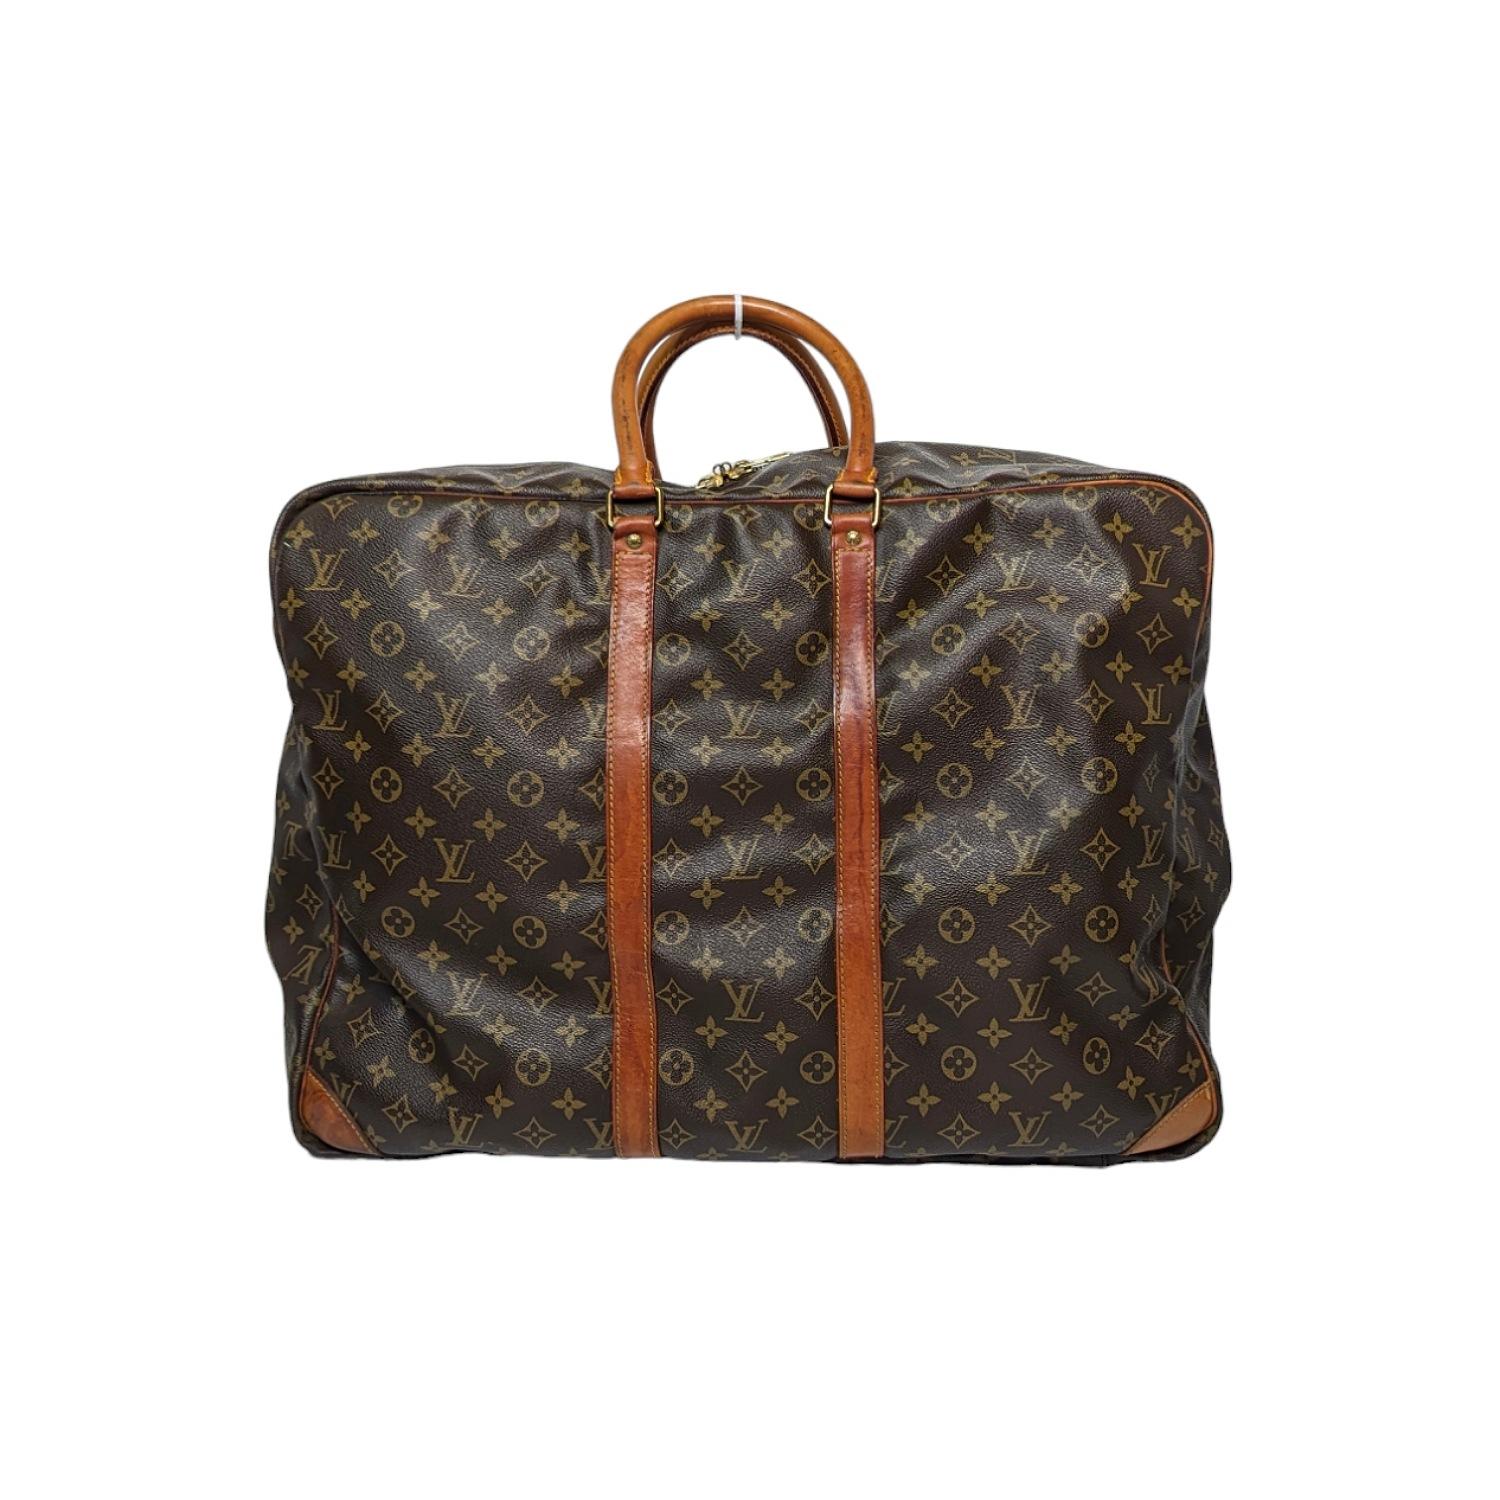 This Louis Vuitton Monogram Canvas single compartment soft suitcase is a member of the Sirius family and will fit in the overhead cabin. This soft suitcase is constructed out of Louis Vuitton's trademark, super-durable Monogram Canvas with cowhide